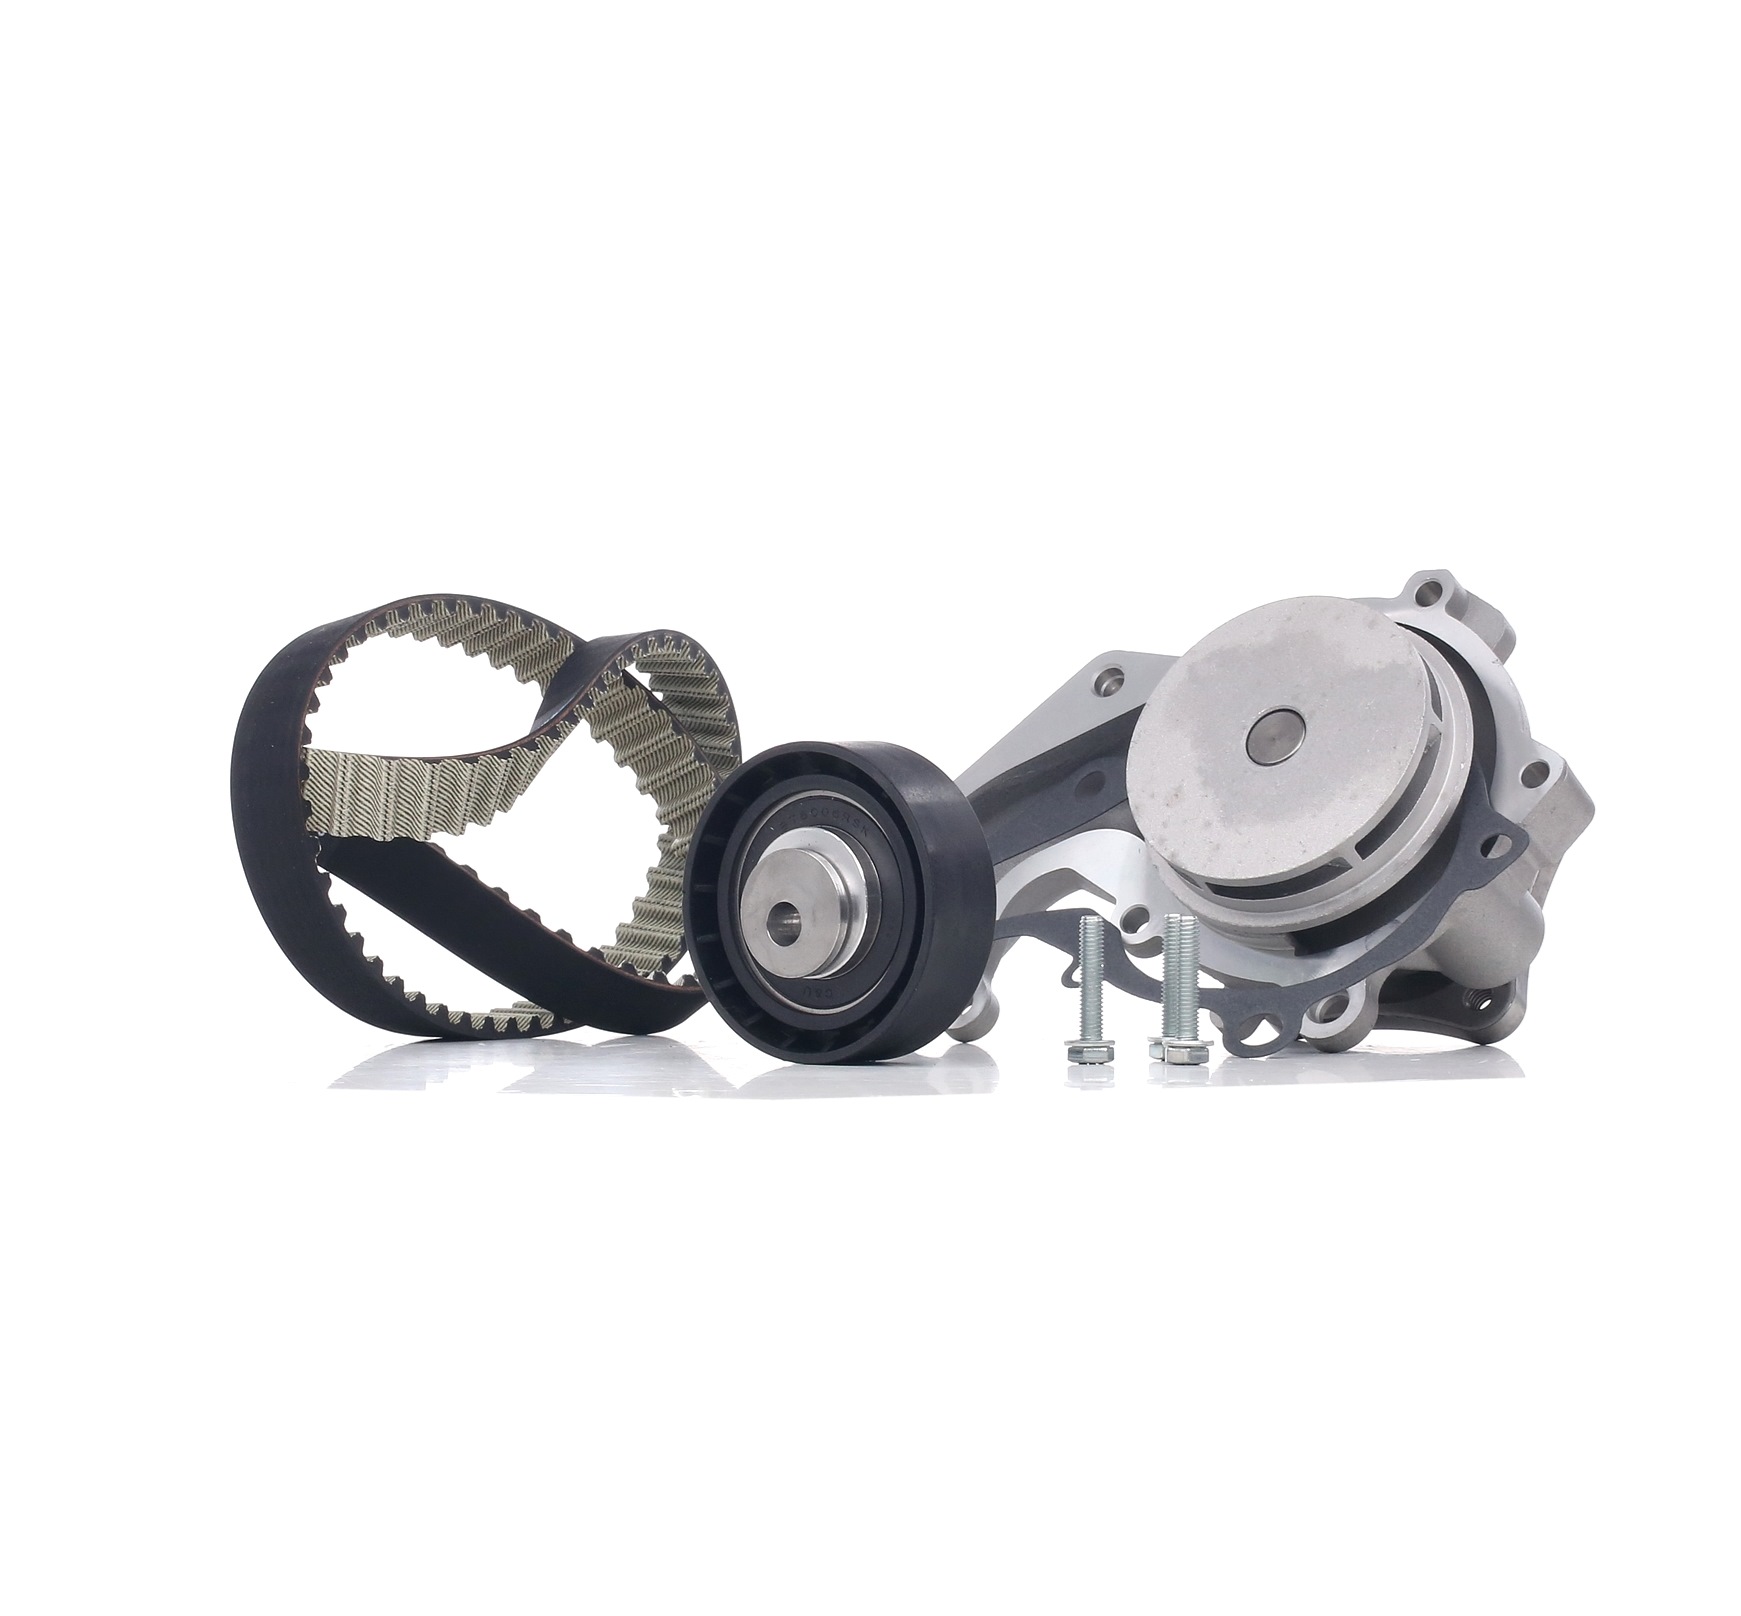 DAYCO KTBWP4700 Water pump and timing belt kit